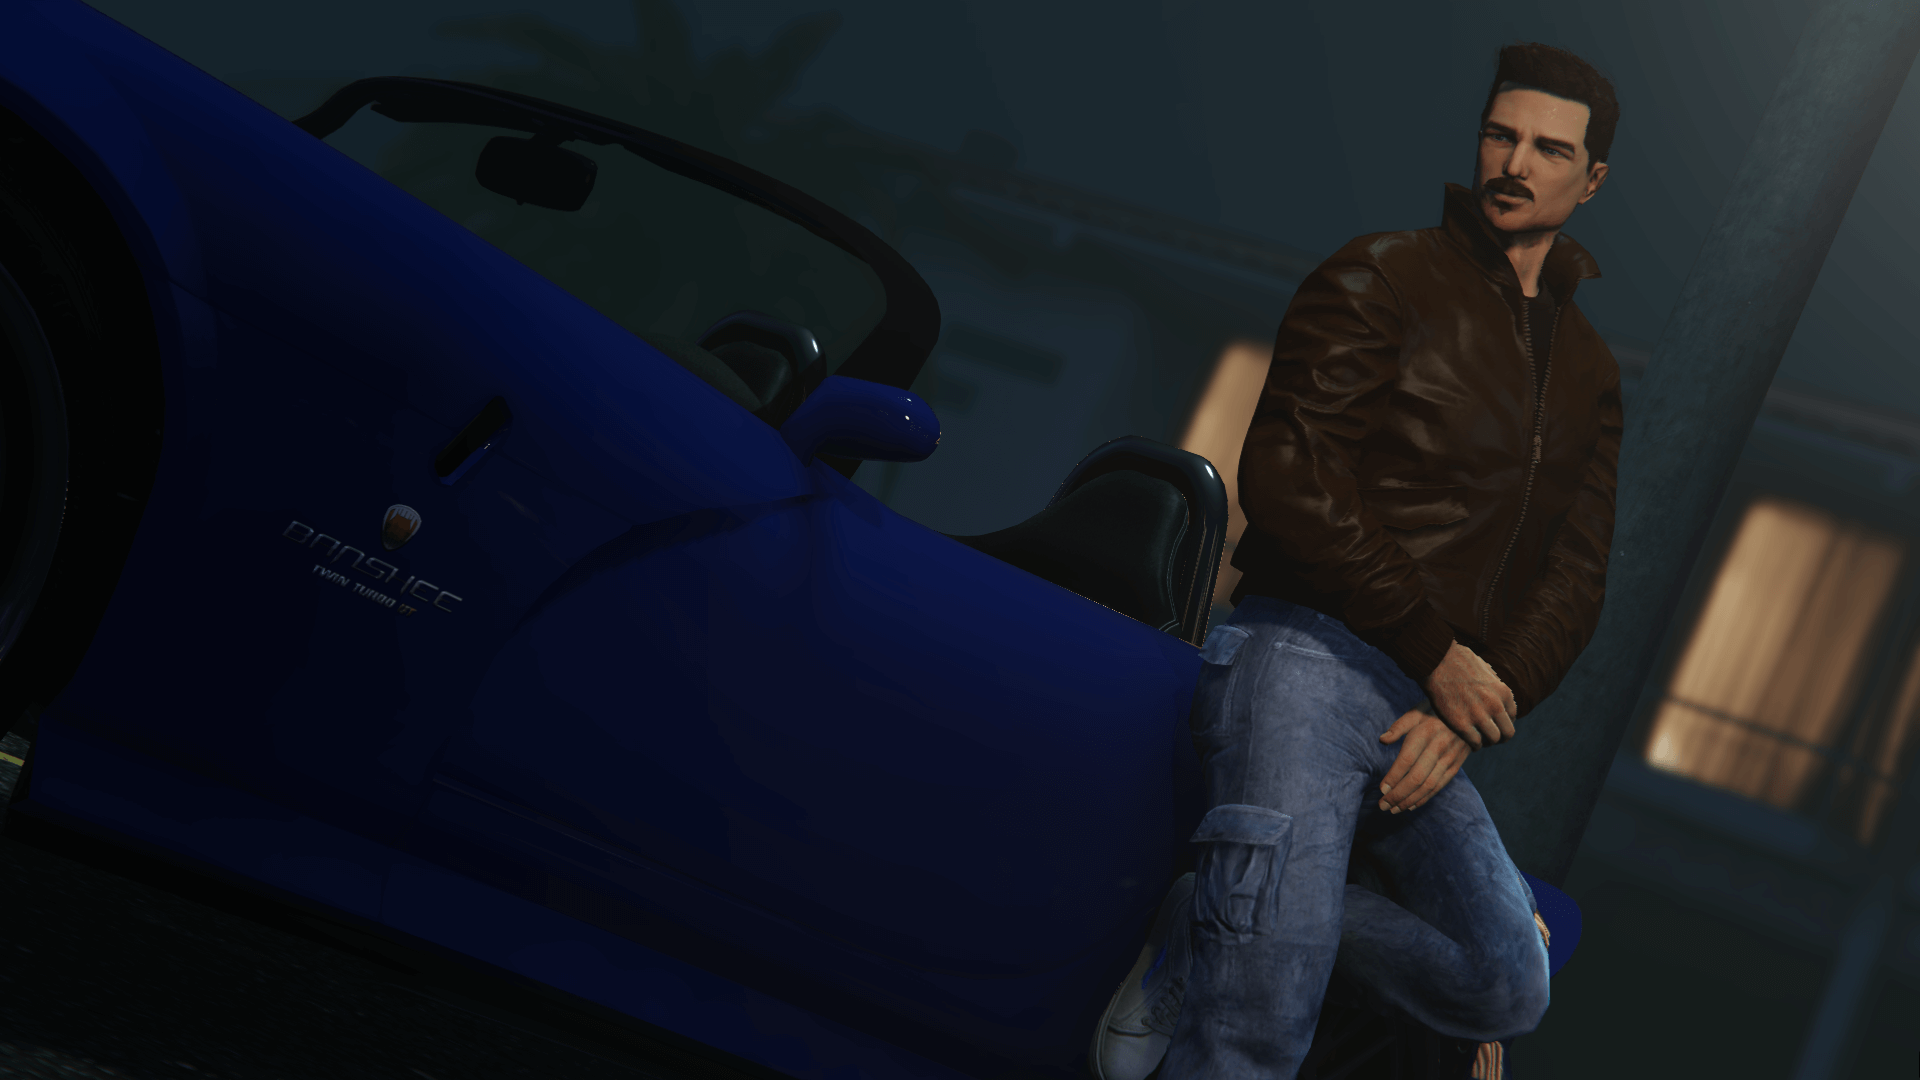 Claude - GTA 3 Original VS Remaster - If you have any suggestions, please  leave a comment here or dm me. - Follow @gtacomparison for…